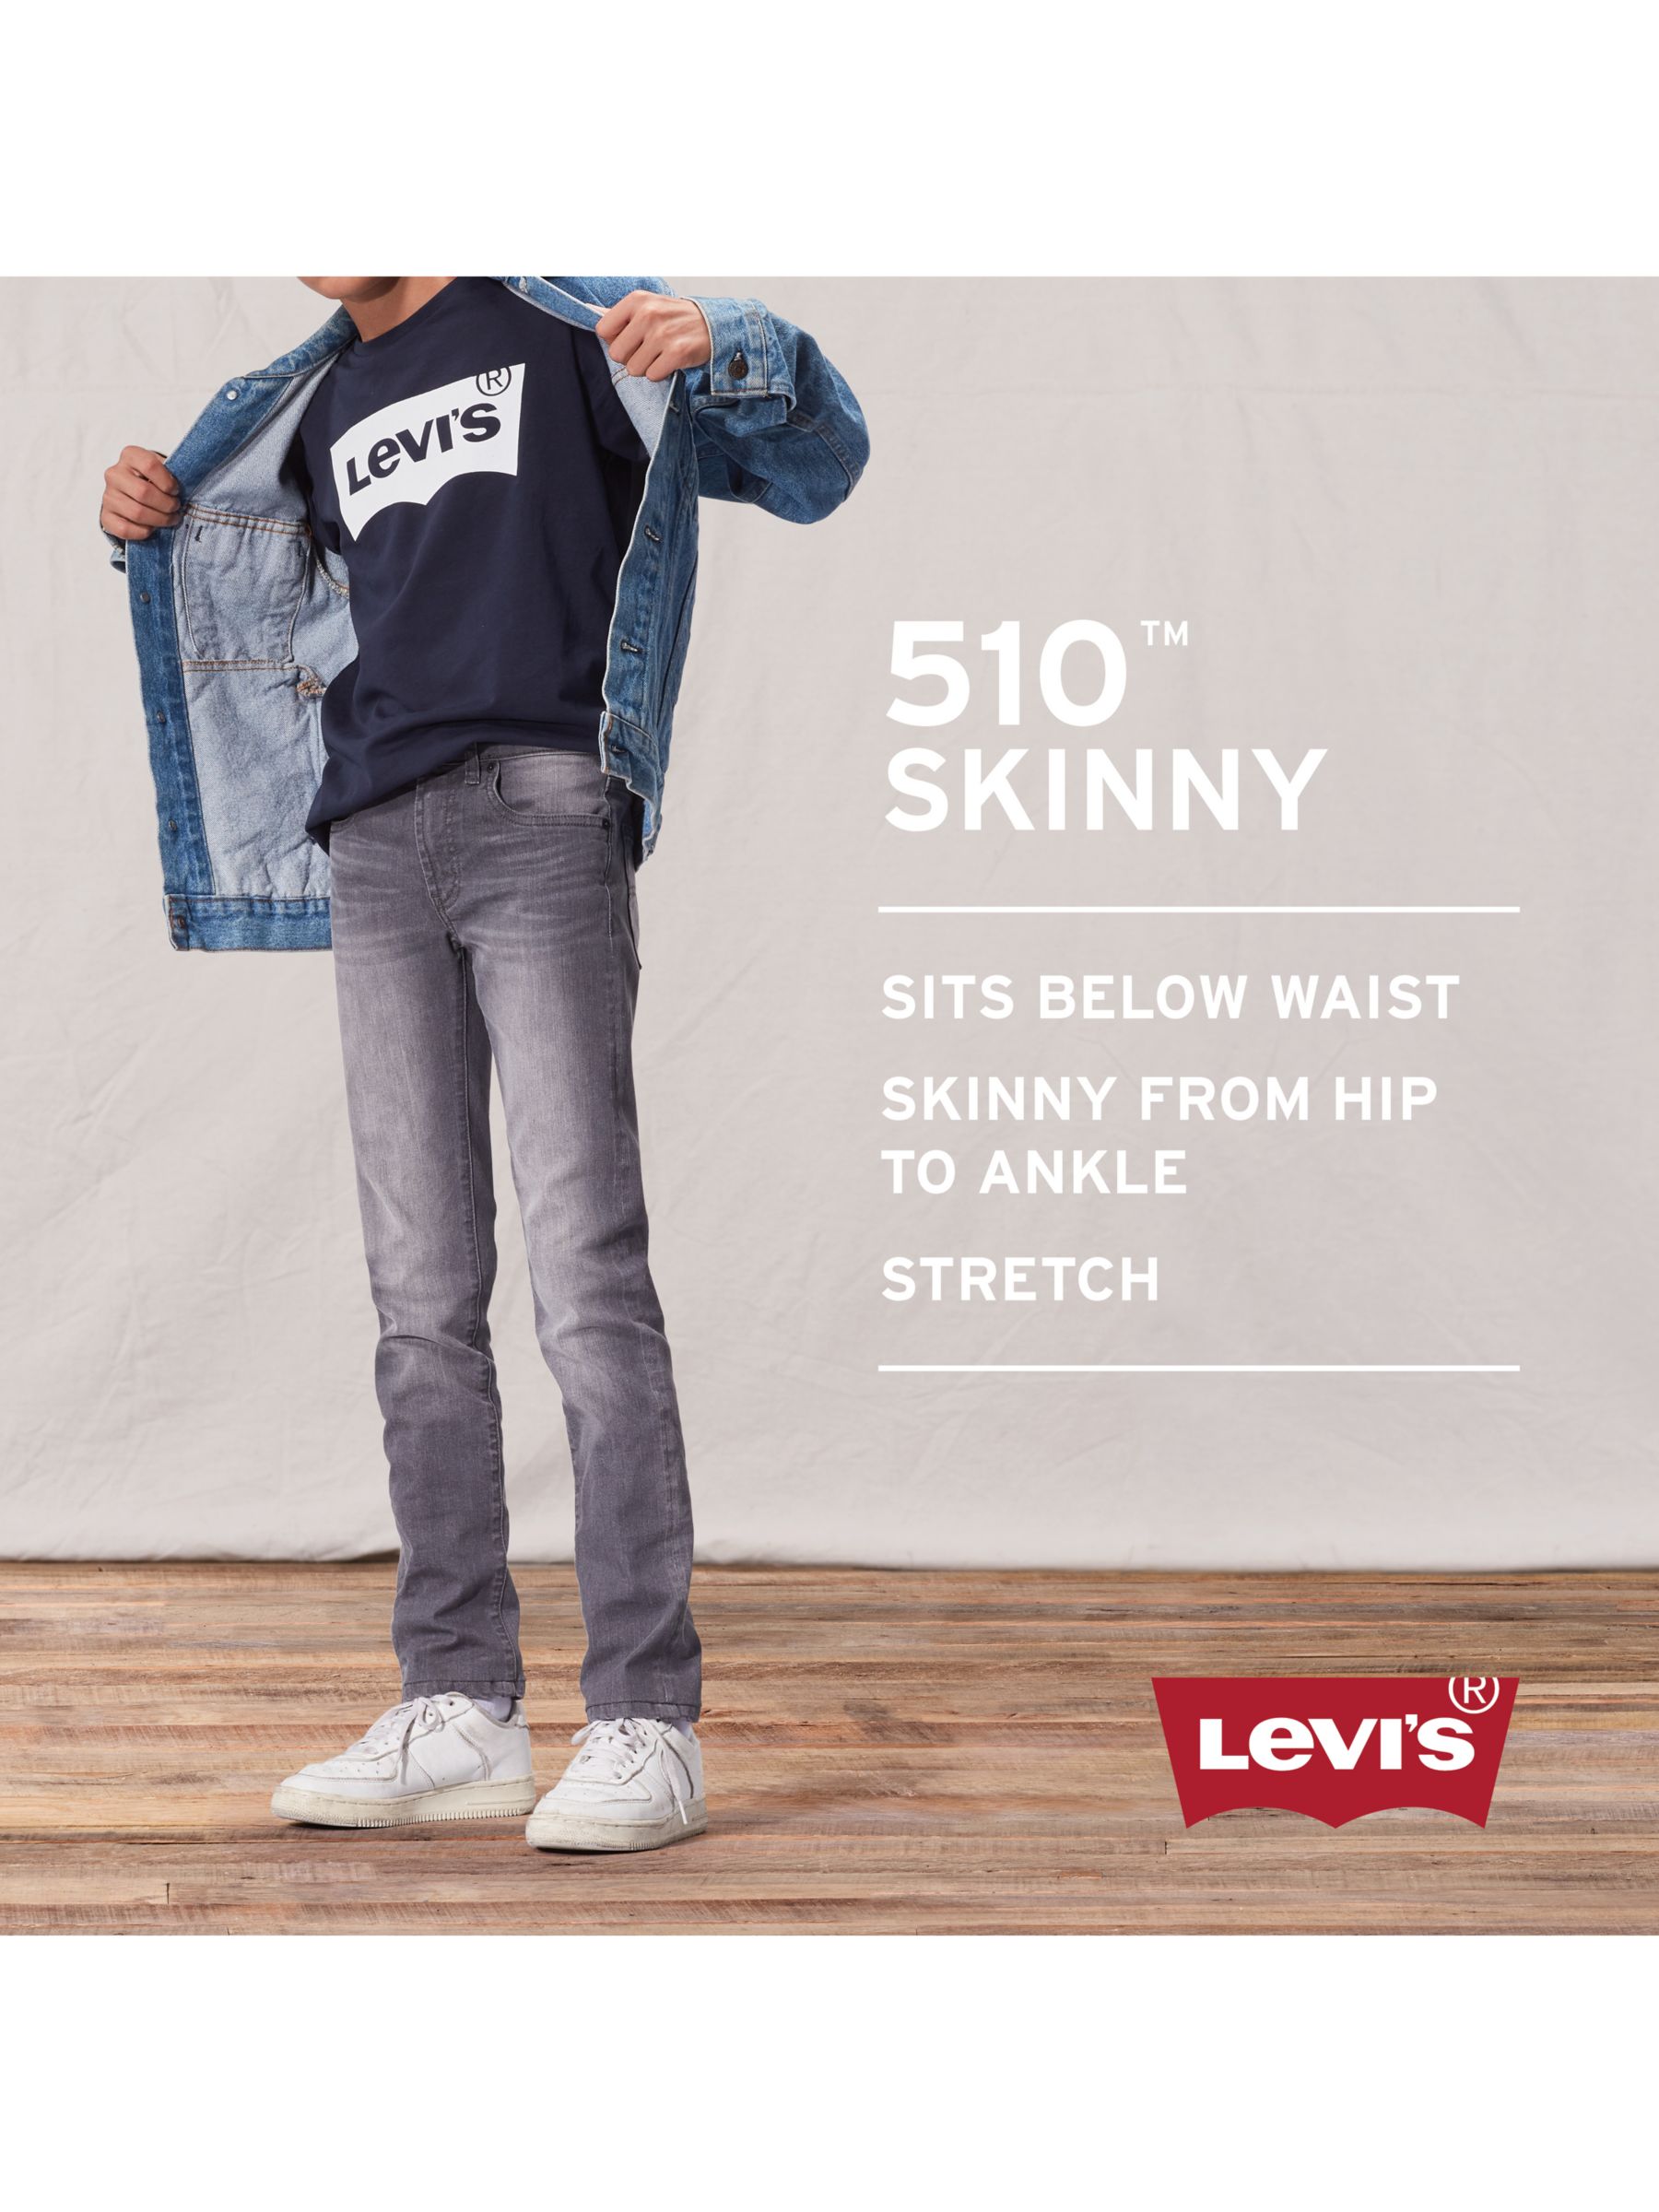 Levi Boys' 510 Skinny Fit Jeans, Blue, 6 years